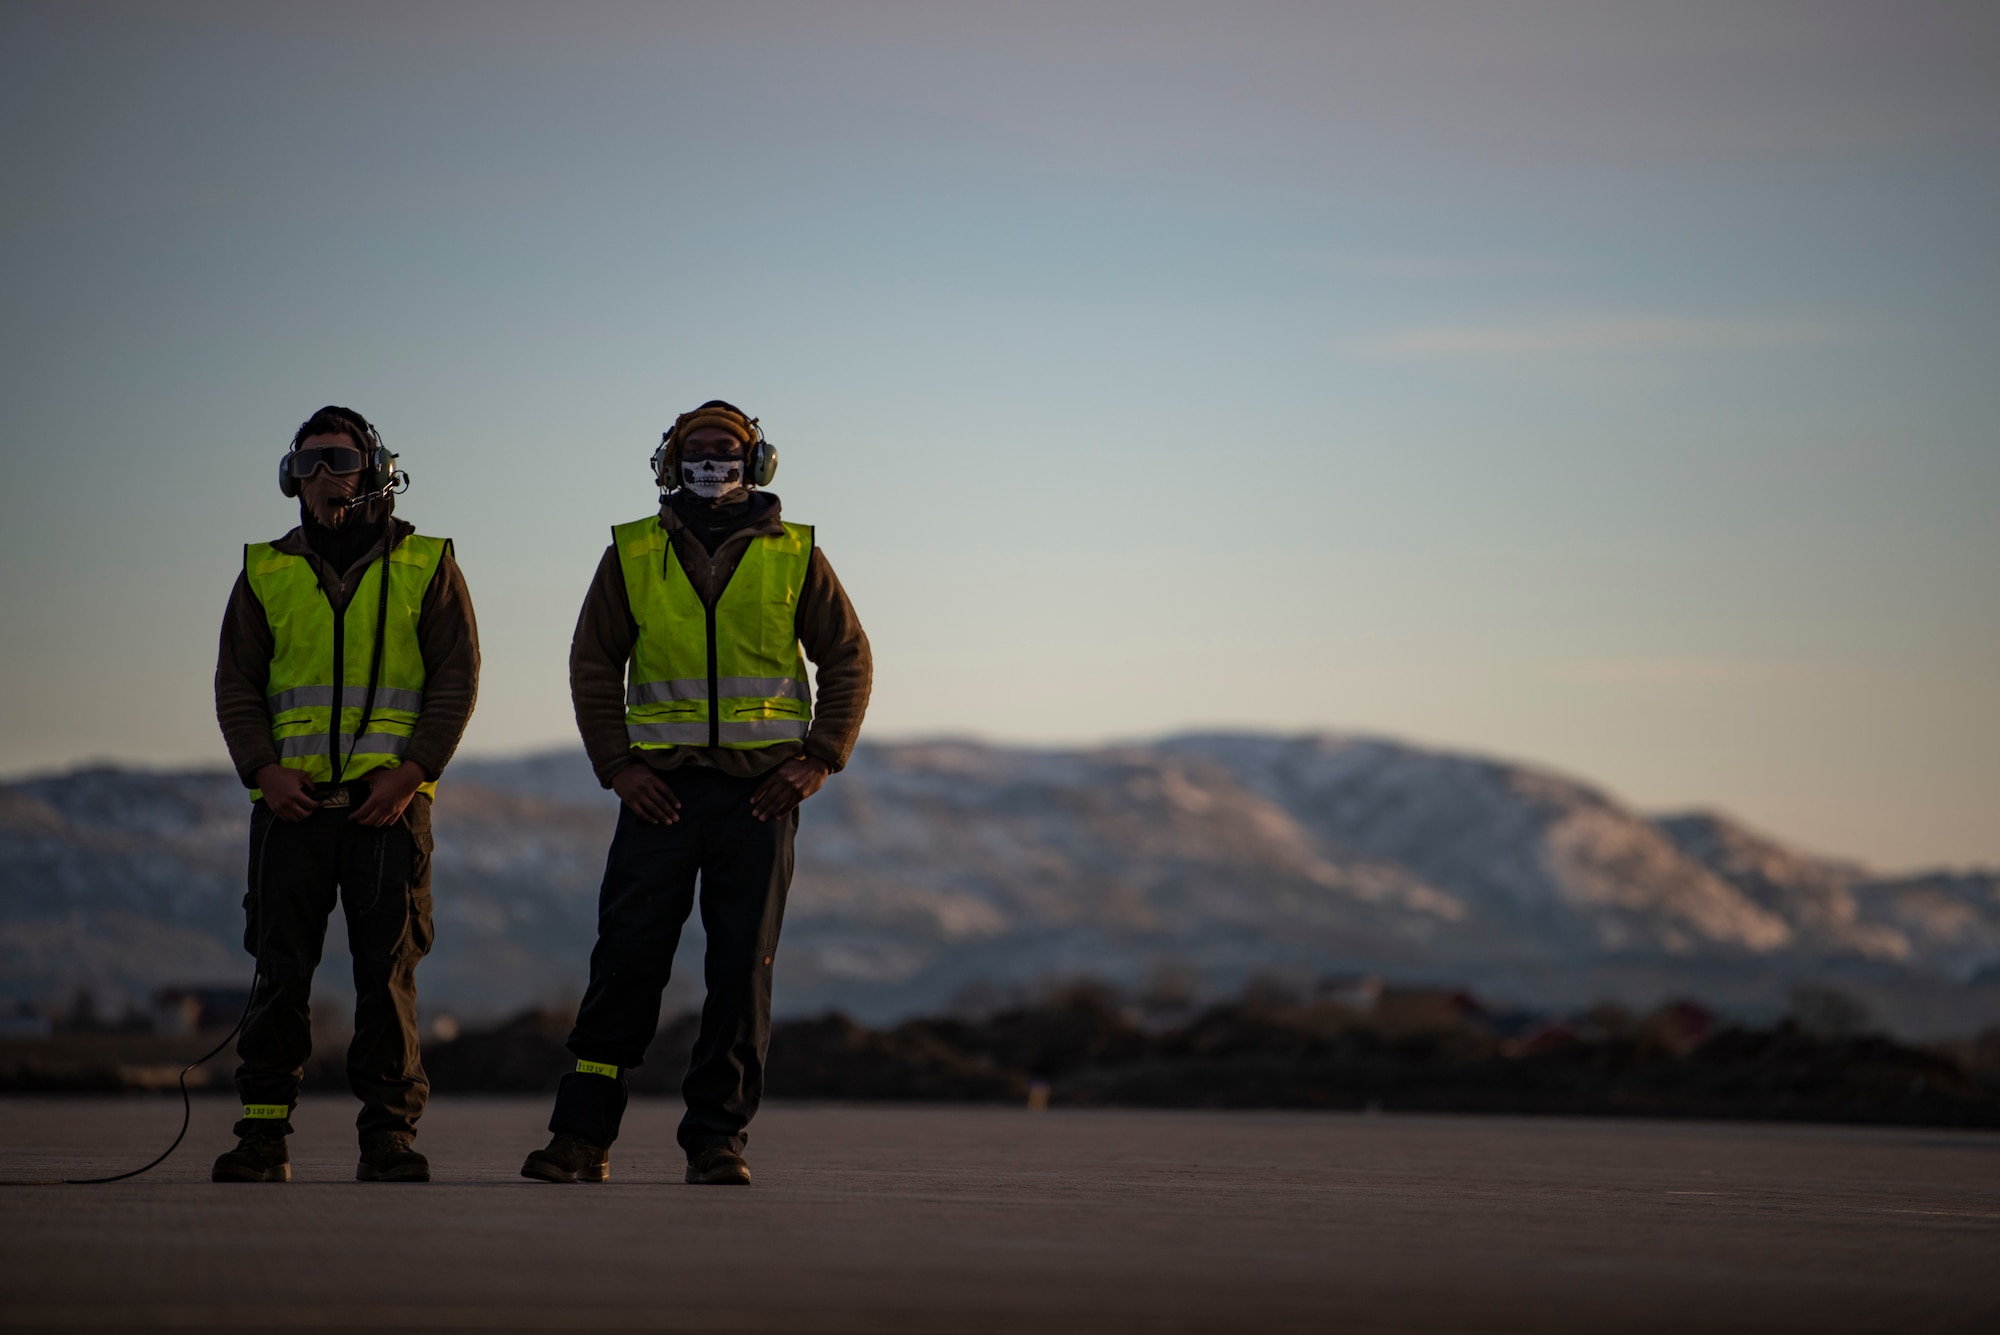 Two crew chiefs assigned to the 9th Expeditionary Bomb Squadron wait to conduct a hot-pit refuelling of a B-1B Lancer at Ørland Air Force Station, Norway, March 14, 2021. Four B-1s and approximately 200 Airmen deployed with the 9th EBS in support of a Bomber Task Force Europe deployment. (U.S. Air Force photo by Airman 1st Class Colin Hollowell)